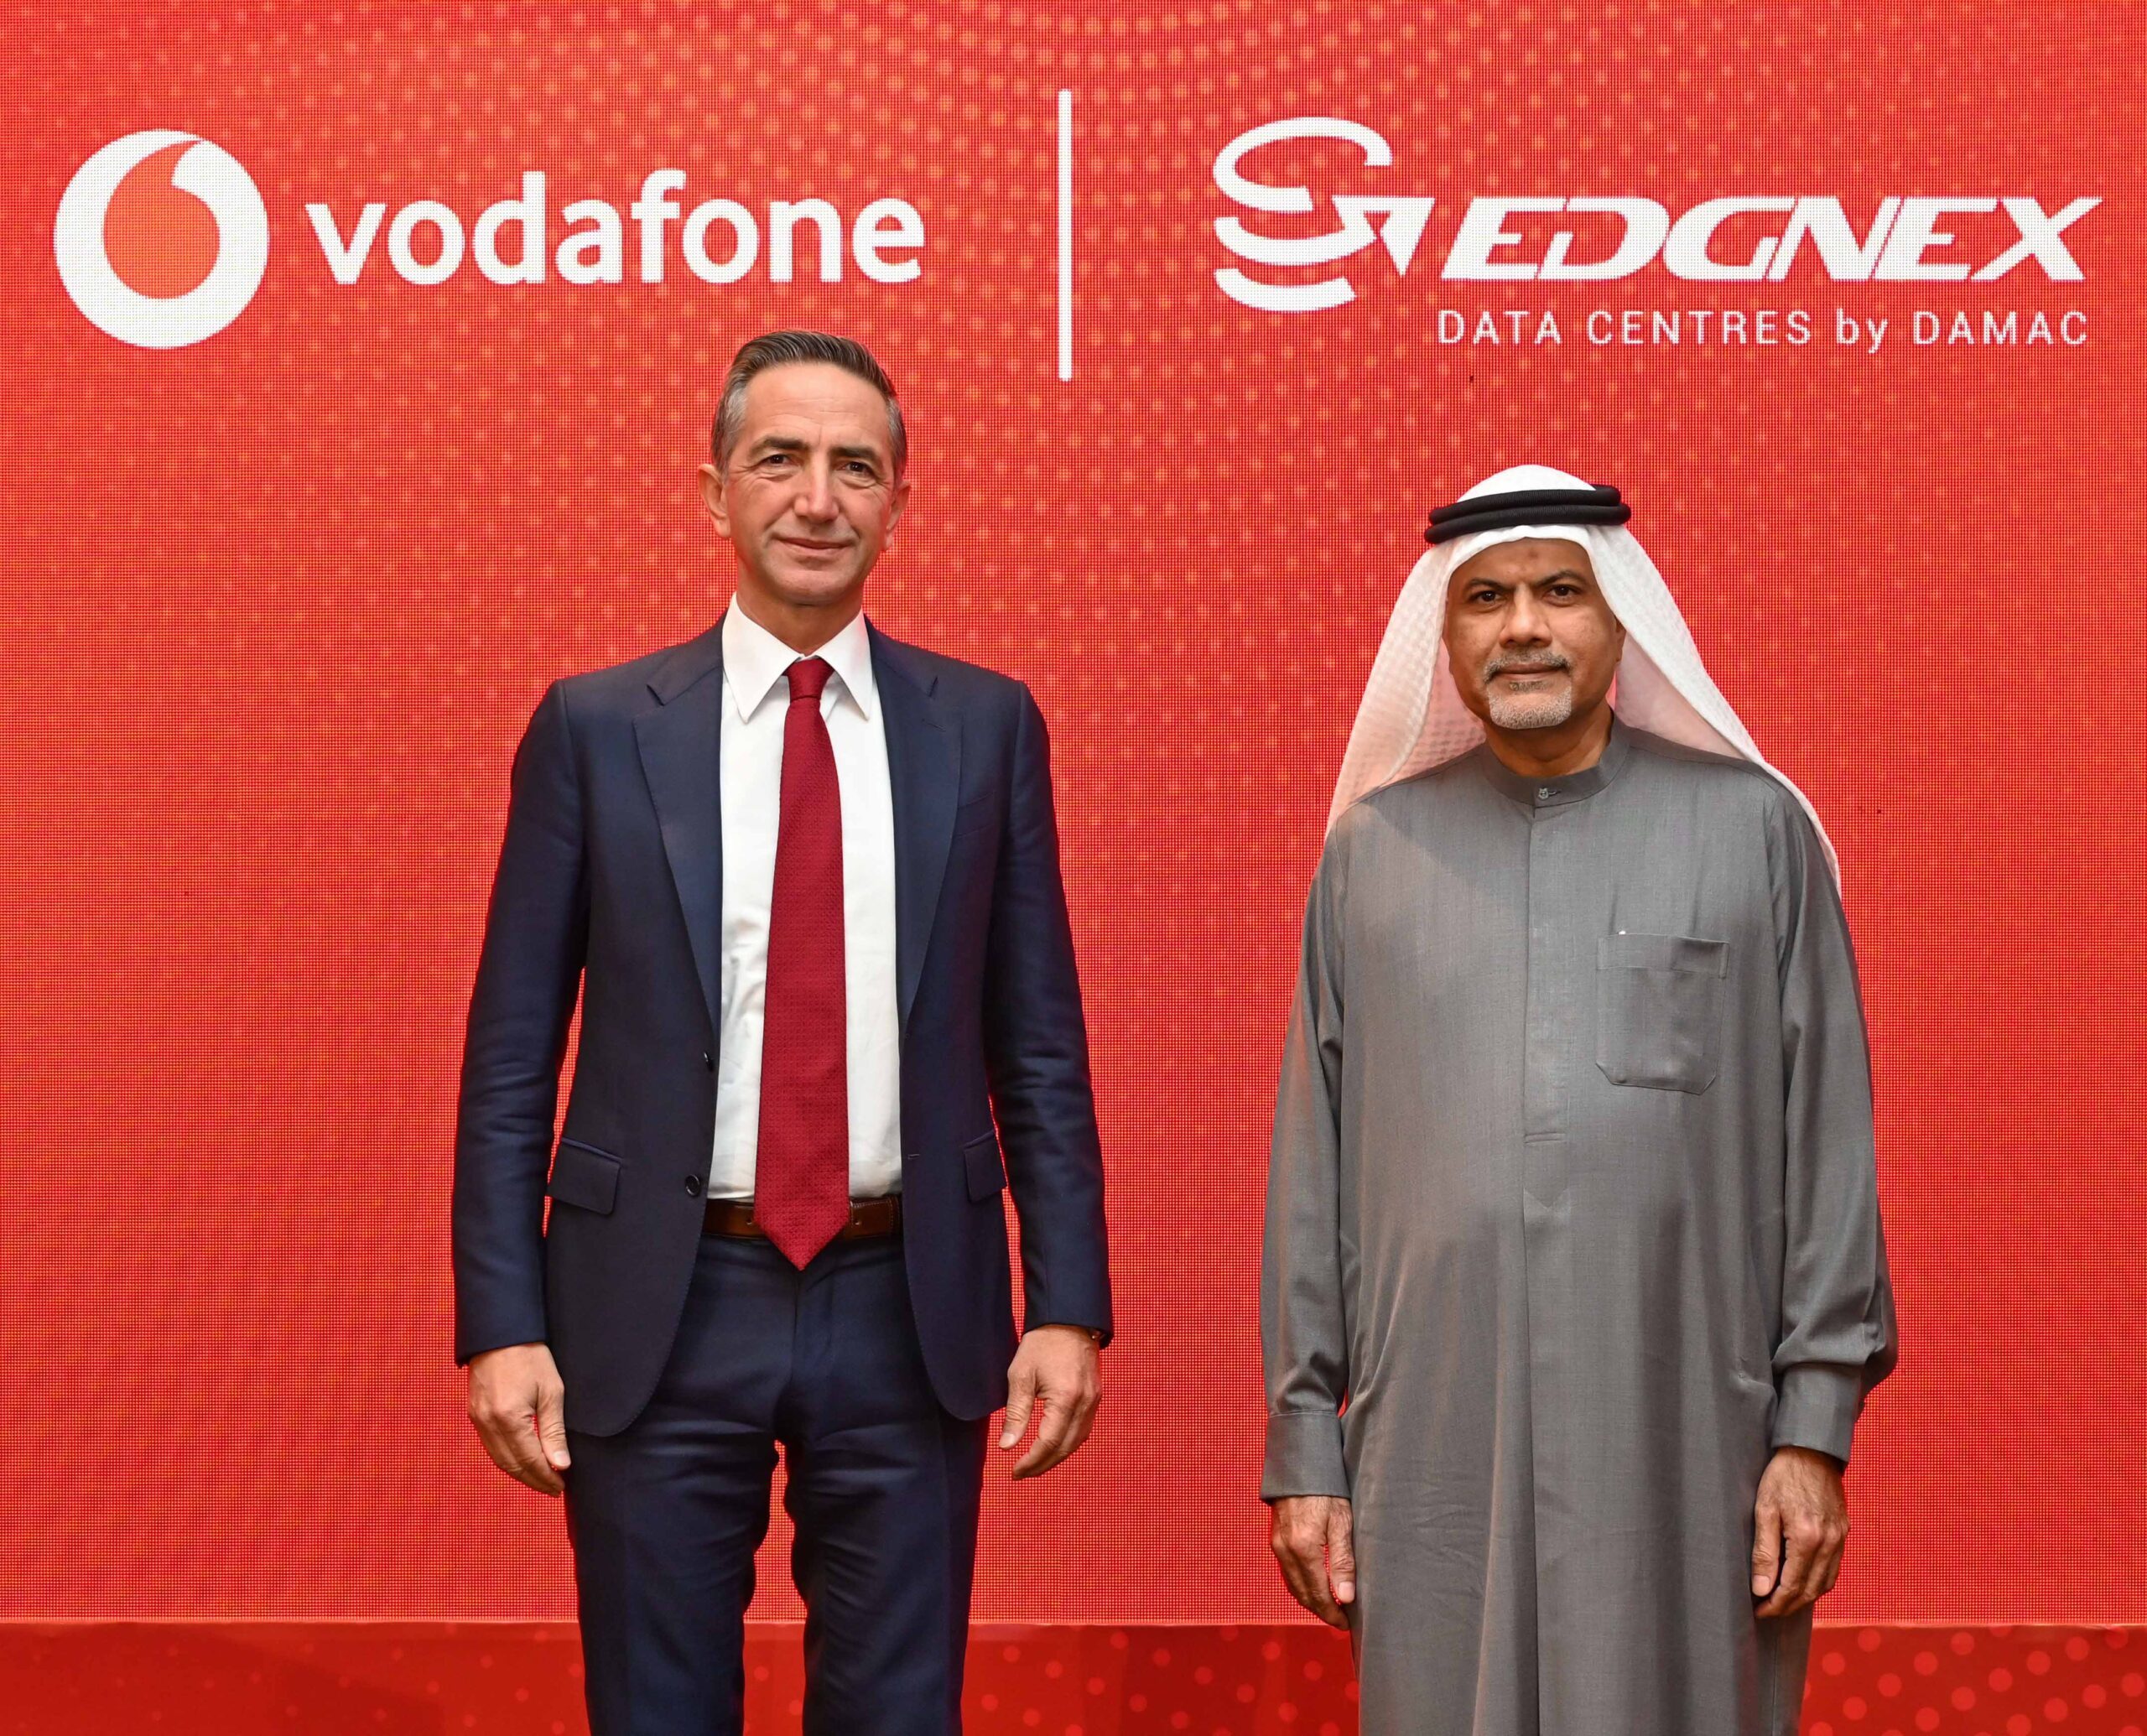 Vodafone Turkey CEO Engin Aksoy and Edgnex vice chairman Aqil Ali at the launch of a new data centre in Turkey